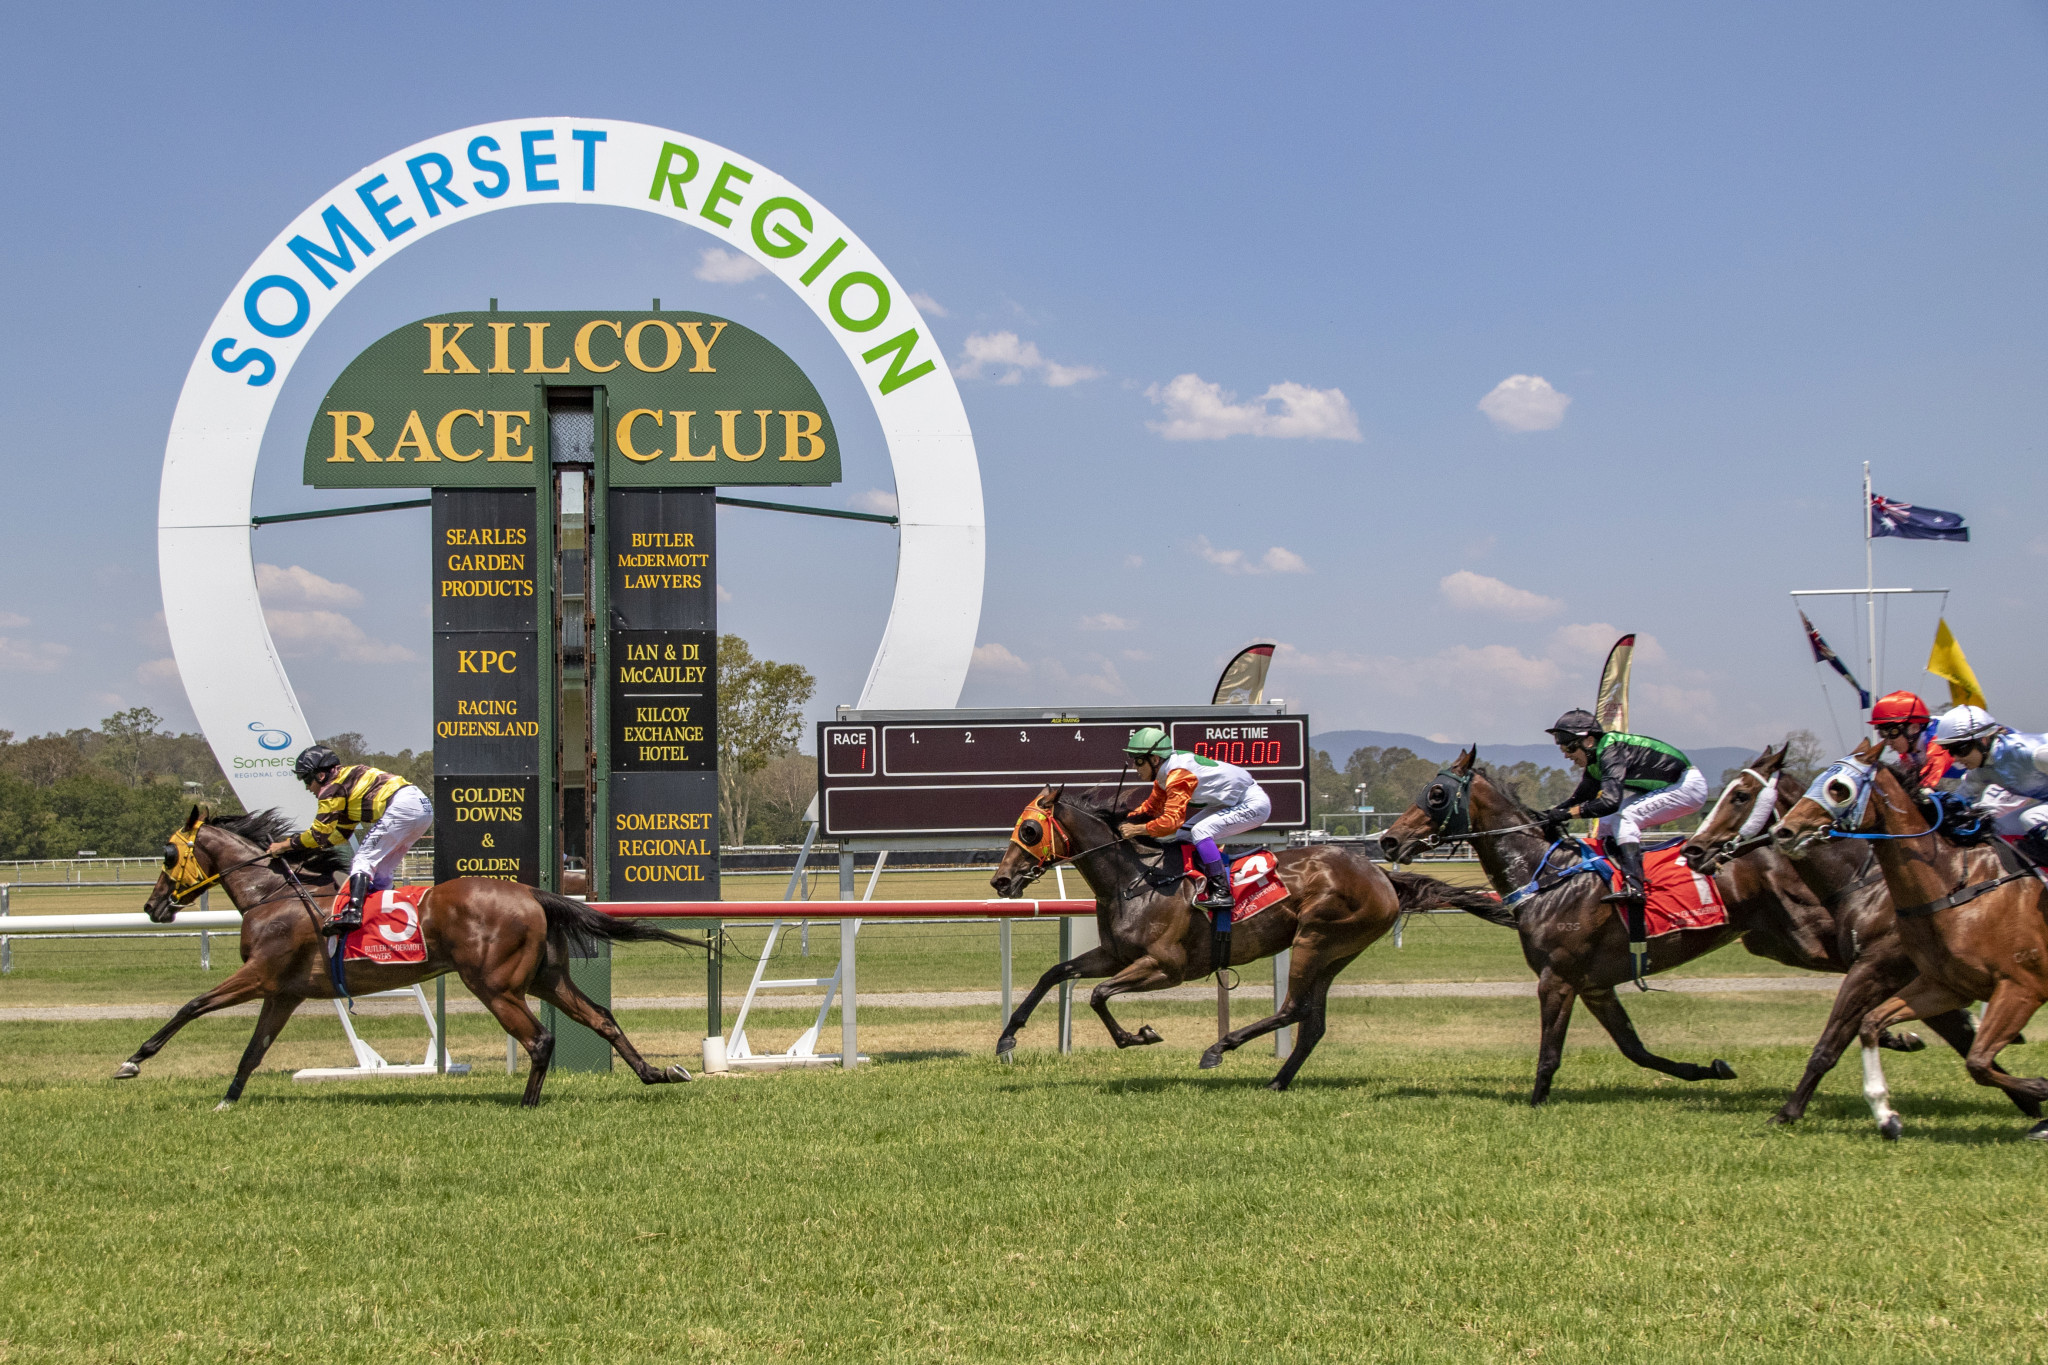 Kilcoy Race Club is one of the community organisations receiving sponsorship support from Somerset Regional Council.